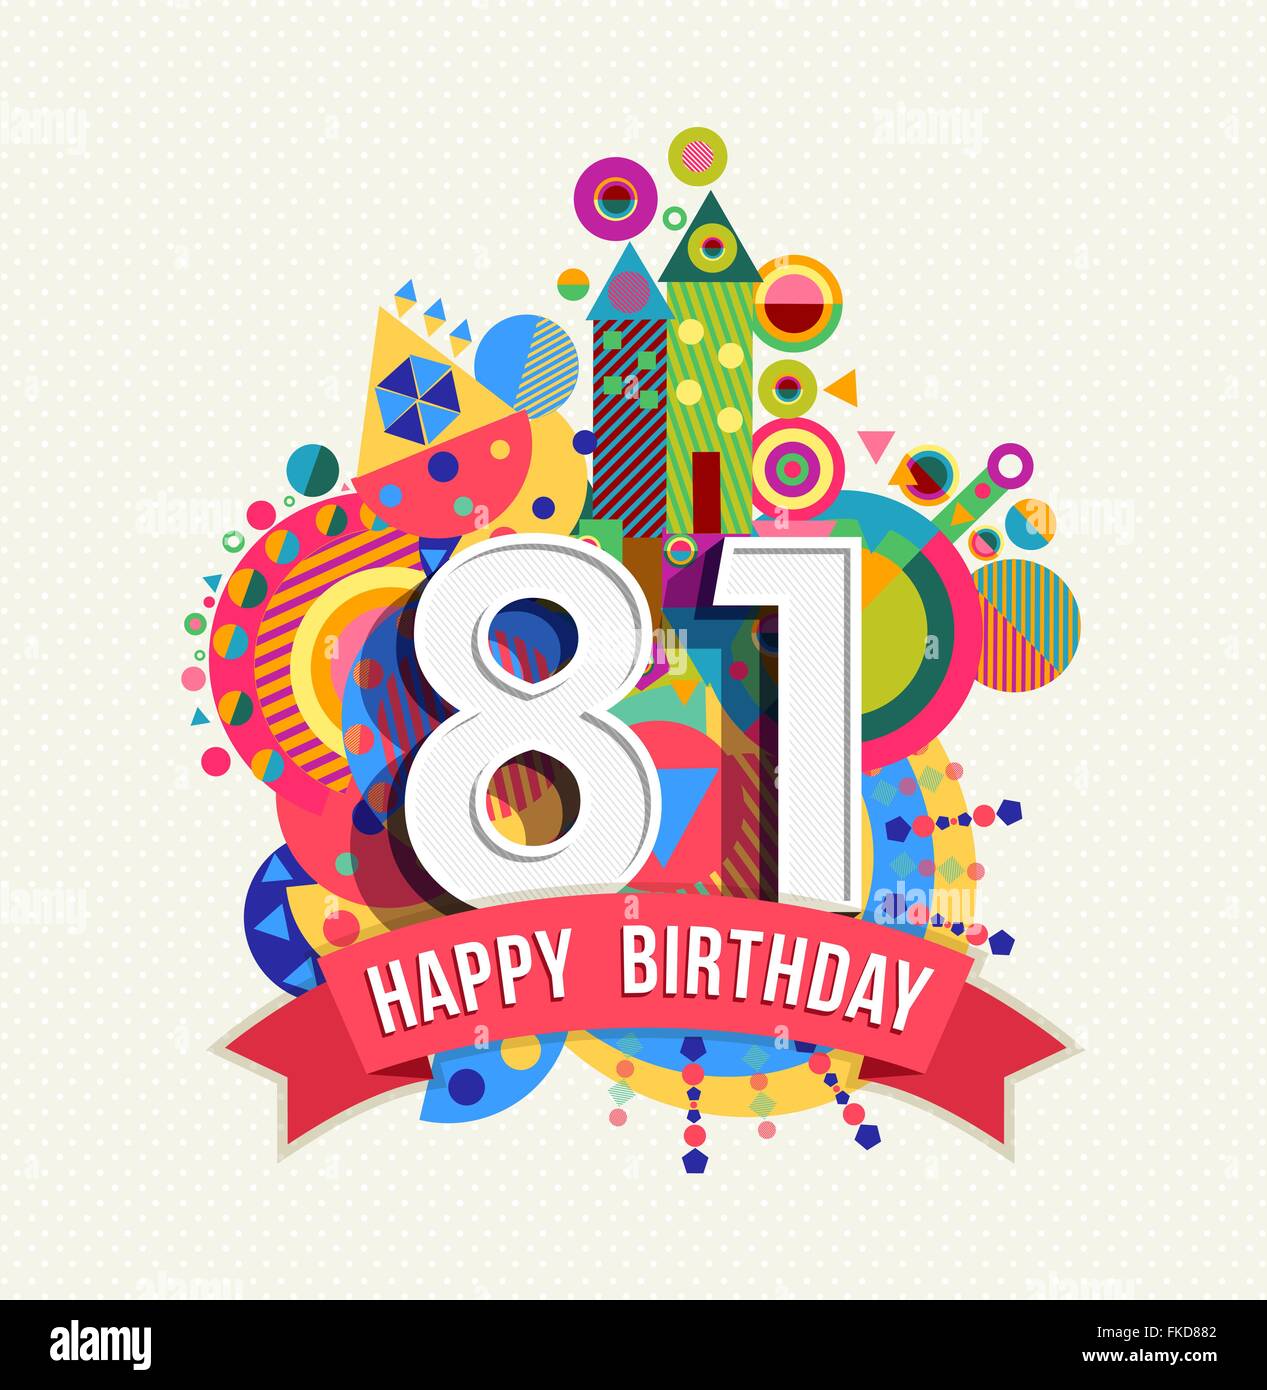 Happy Birthday eighty one 81 year, fun celebration anniversary greeting card with number, text label and colorful geometry Stock Vector